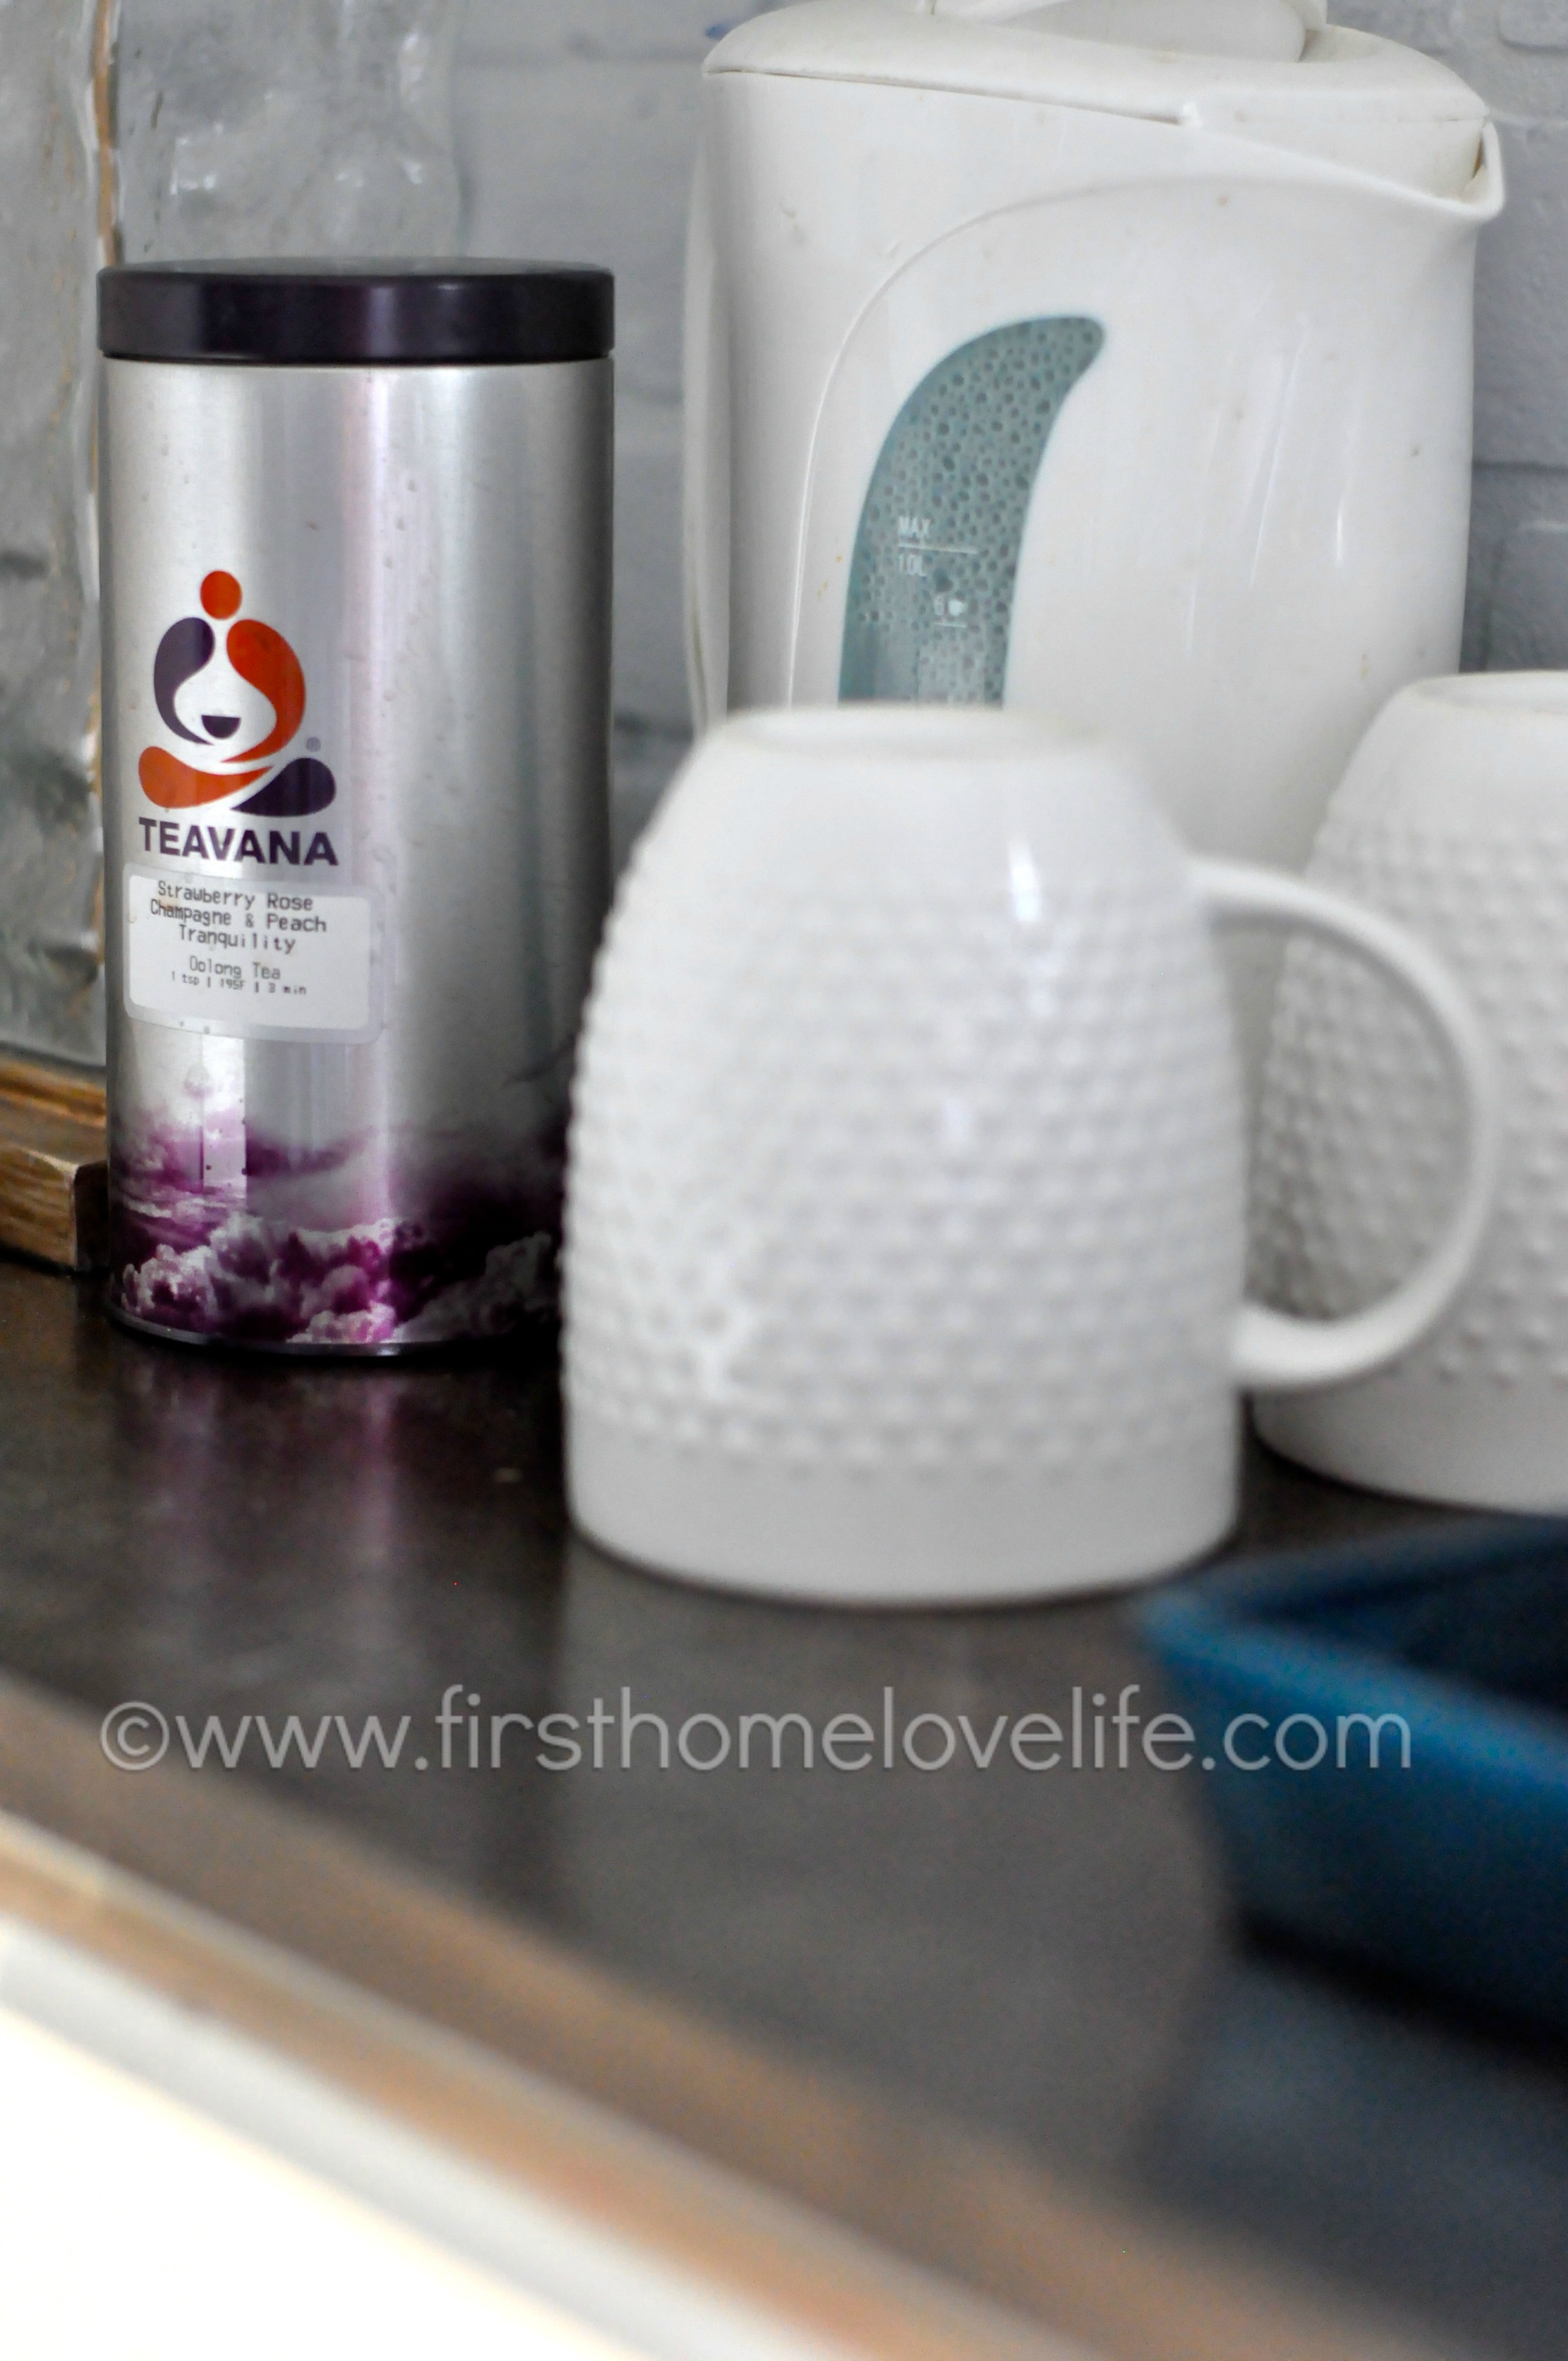 Guest Room Essentials - First Home Love Life